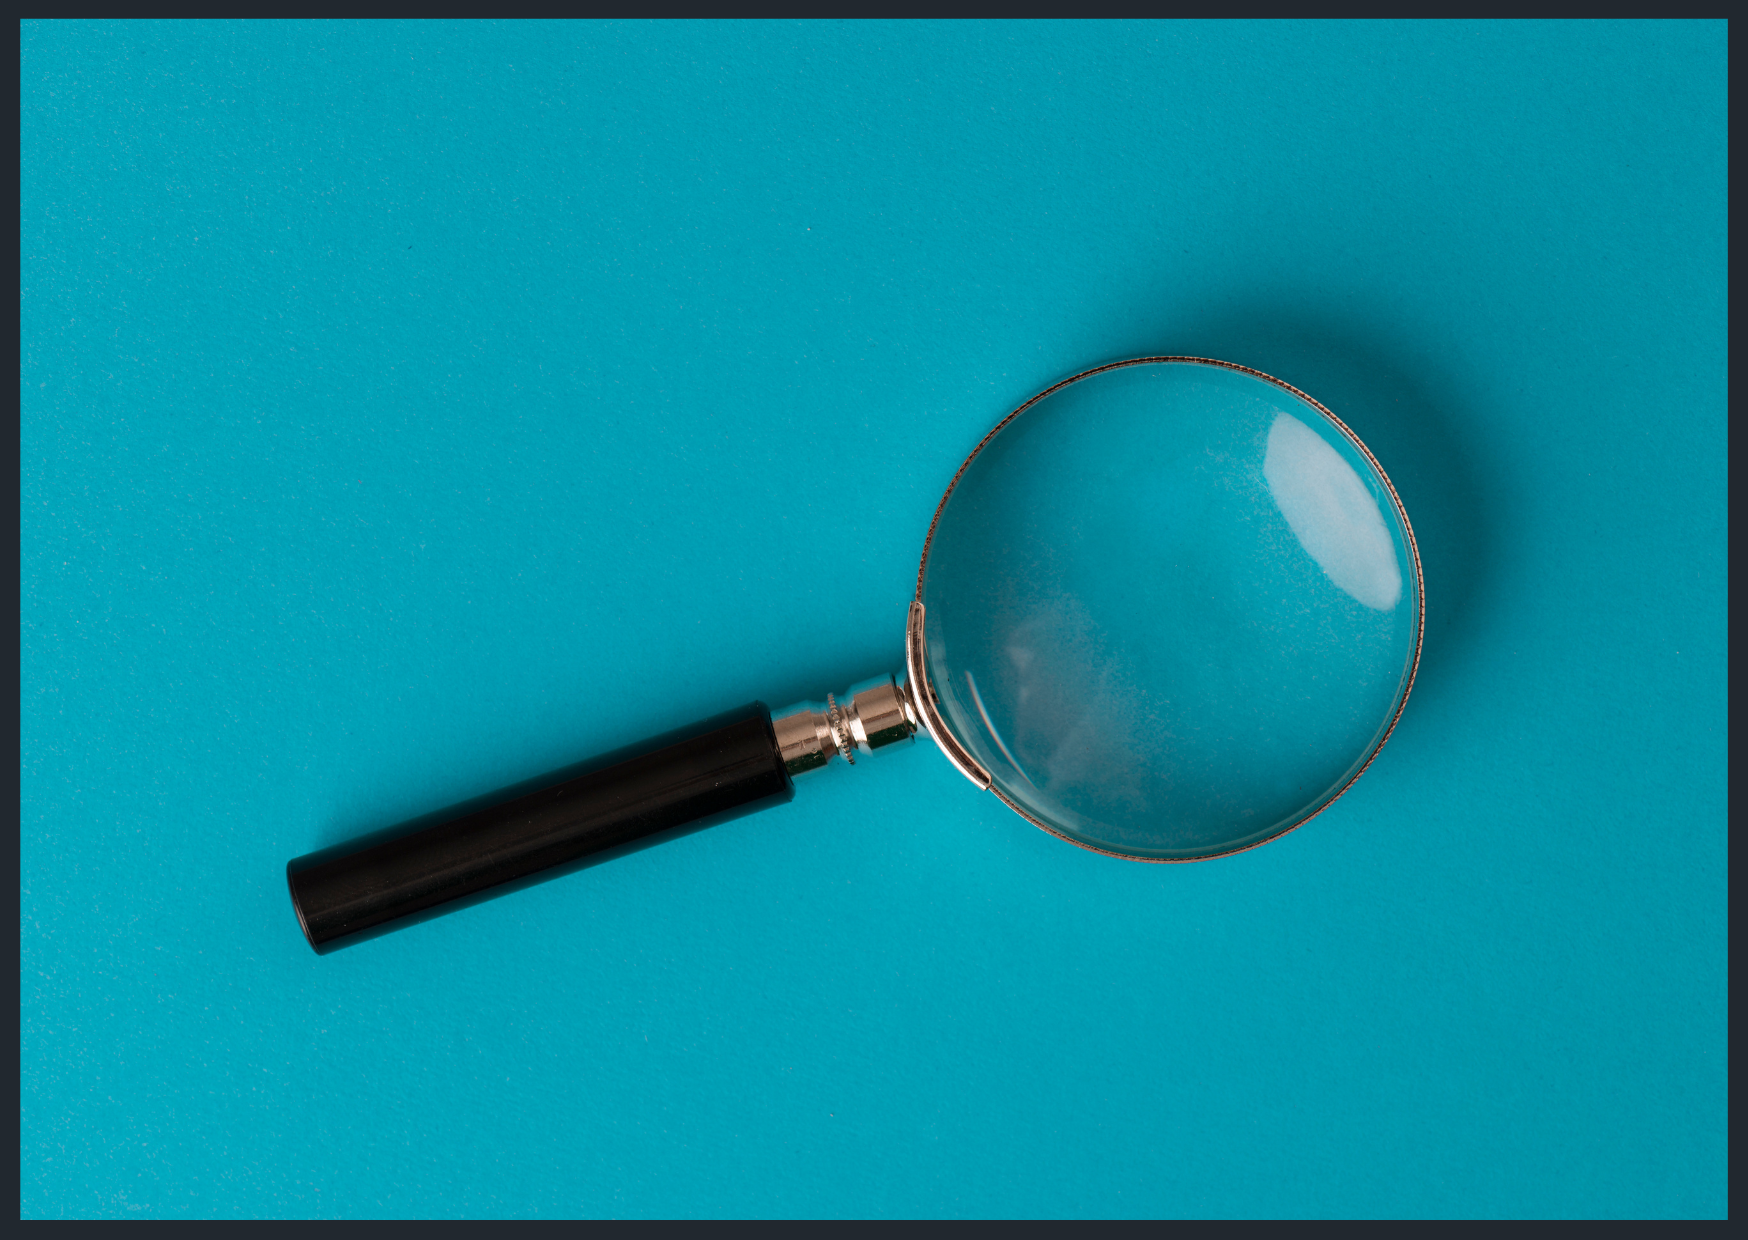 Magnifying glass on blue background